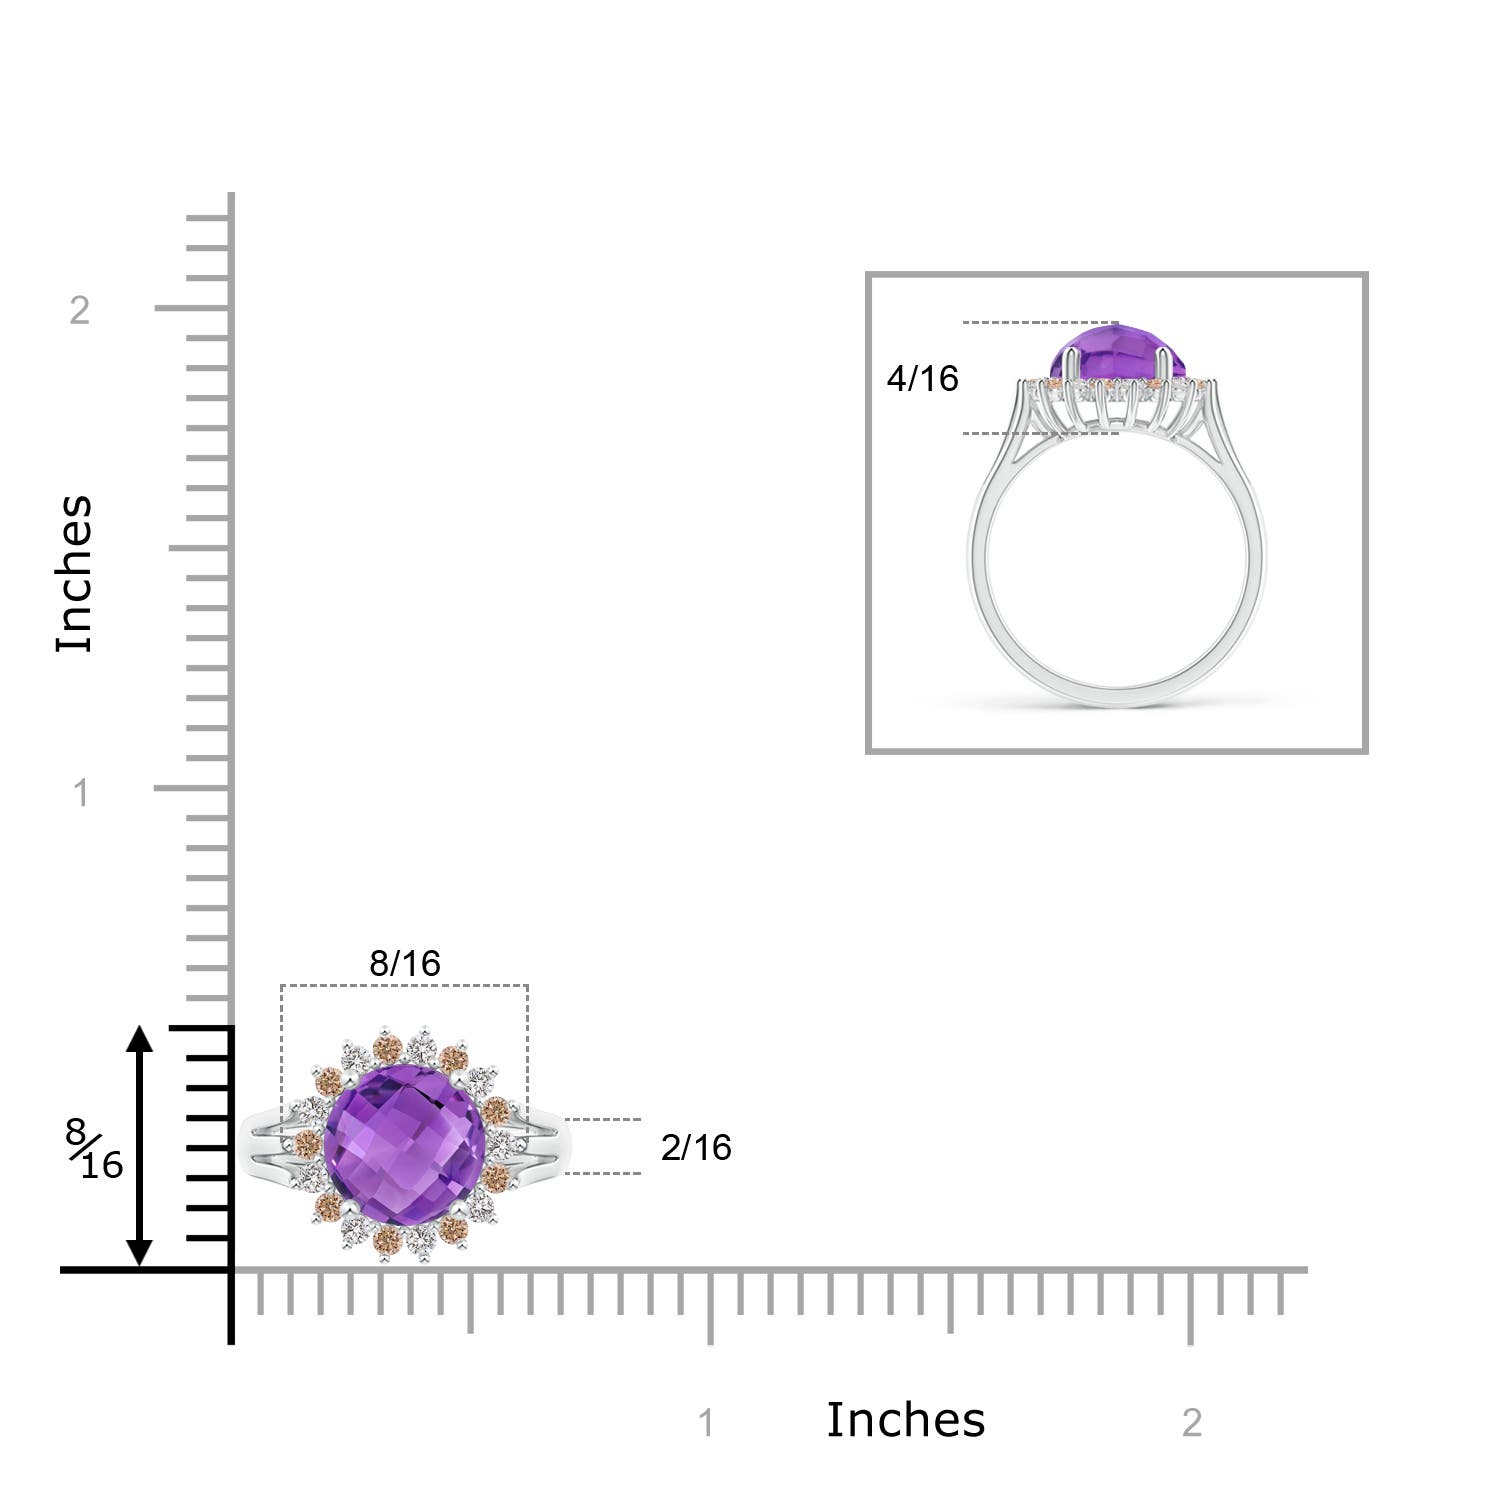 AA - Amethyst / 2.1 CT / 14 KT White Gold